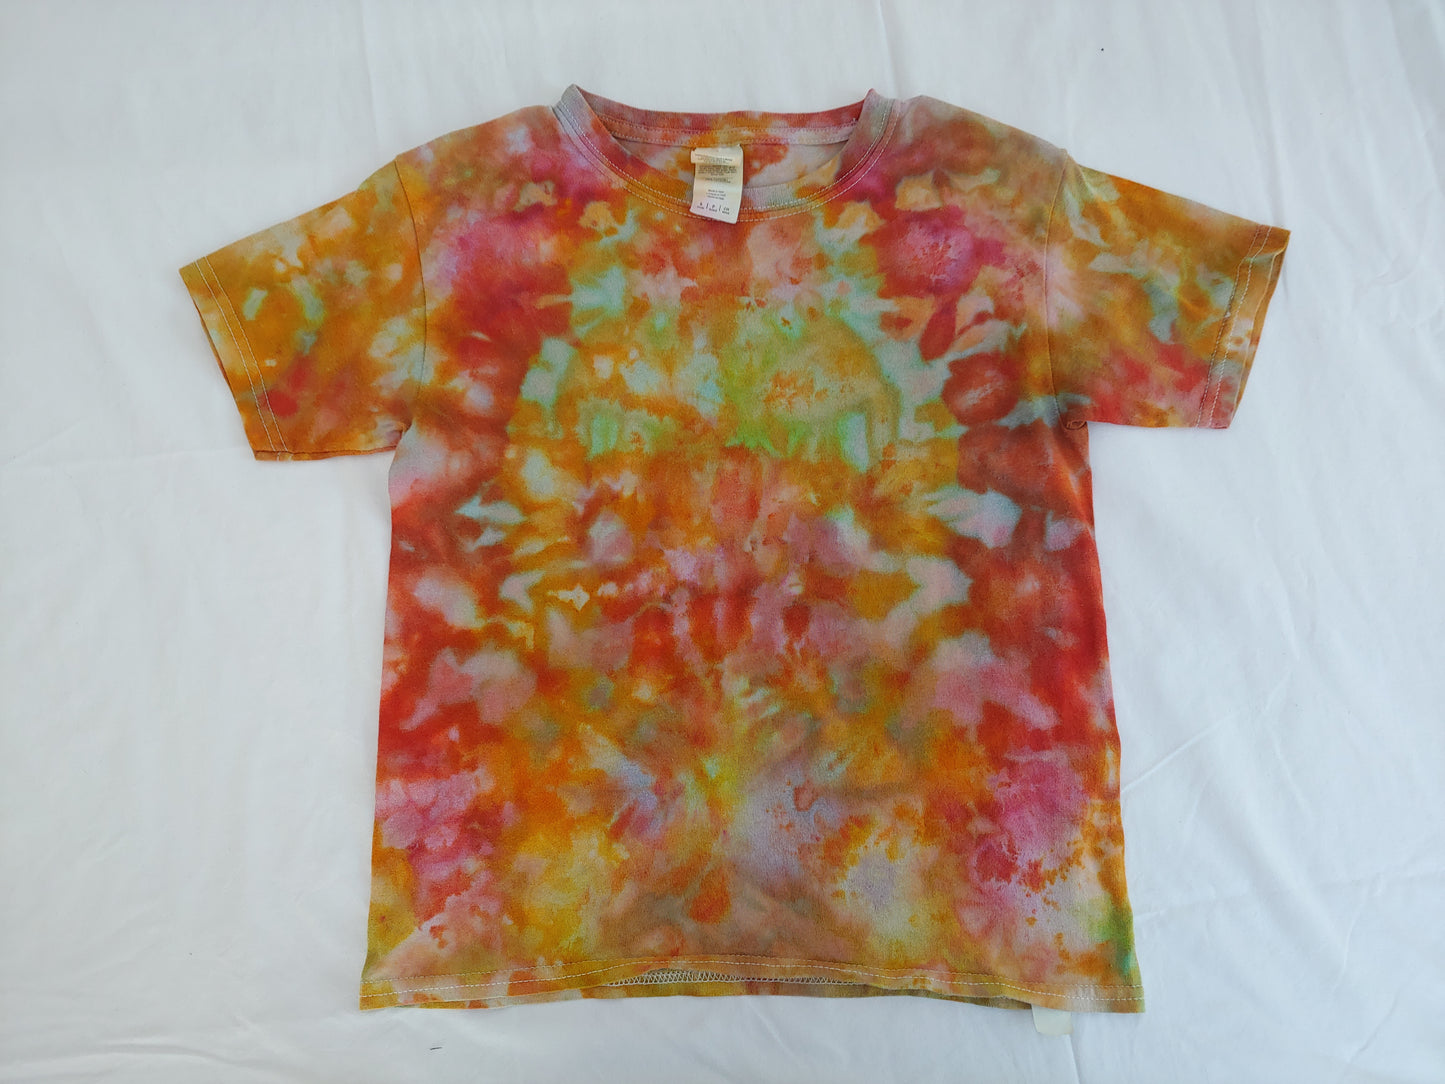 YOUTH SMALL TIE DYE TEE 56